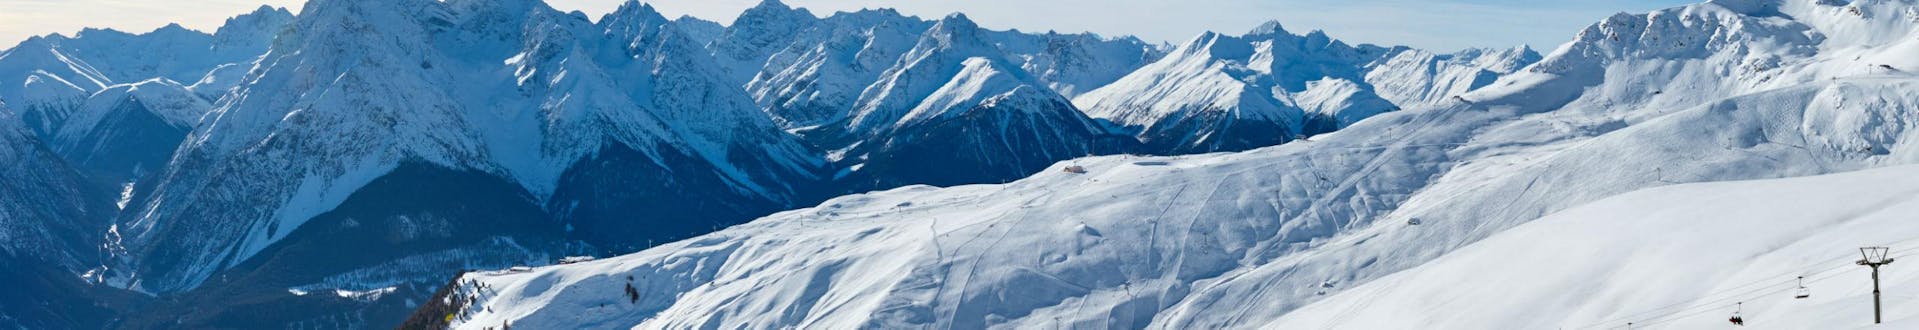 A panoramic view of one of the ski slopes in the Swiss ski resort of Scuol - Motta Naluns, where local ski schools offer a variety of ski lessons.